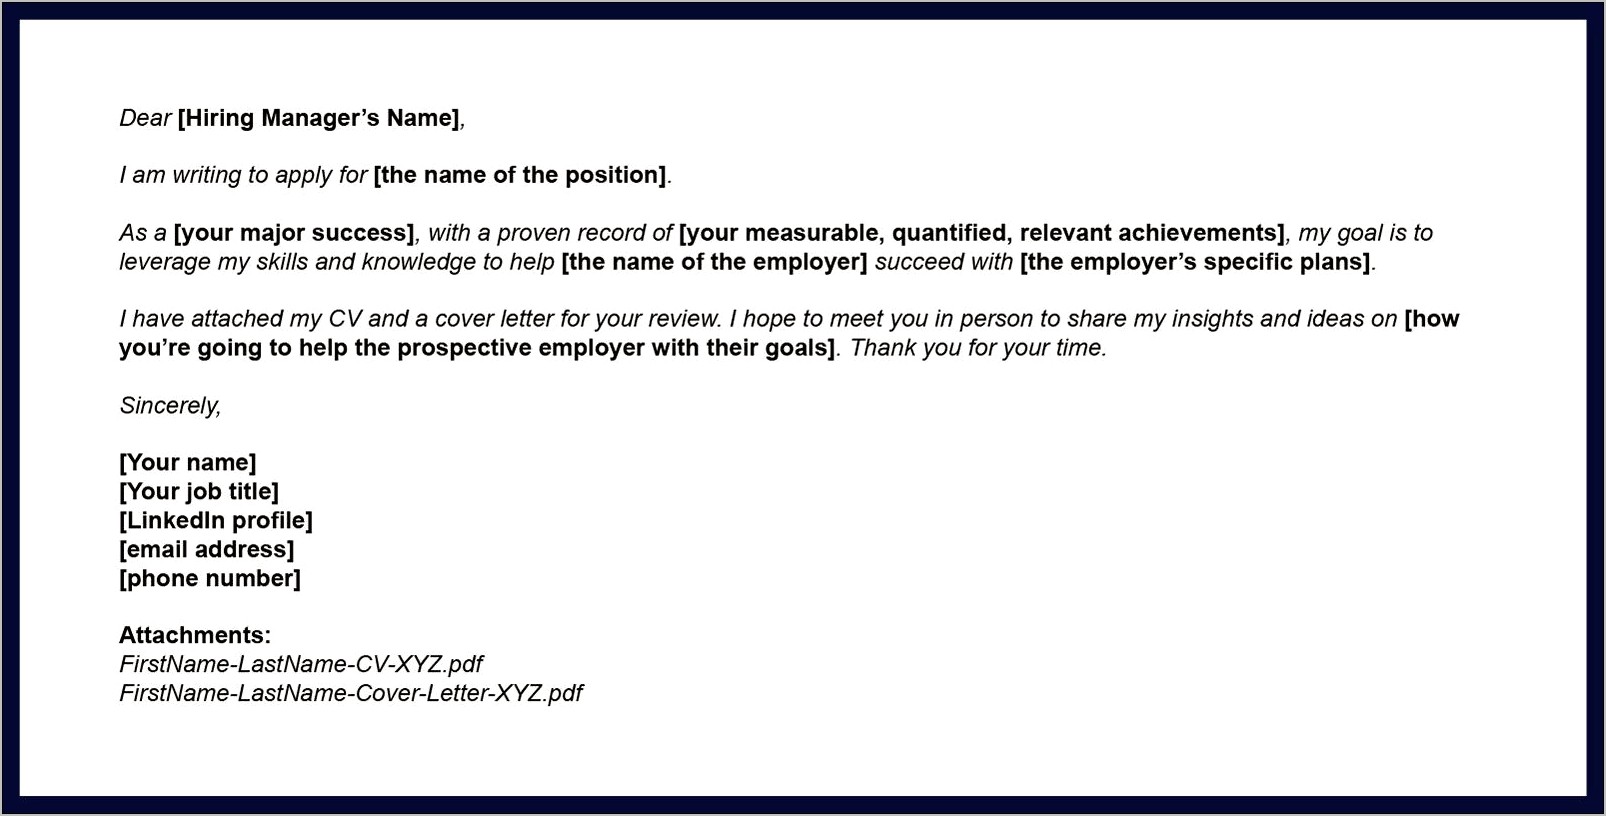 Sample Email Attaching Cover Letter And Resume